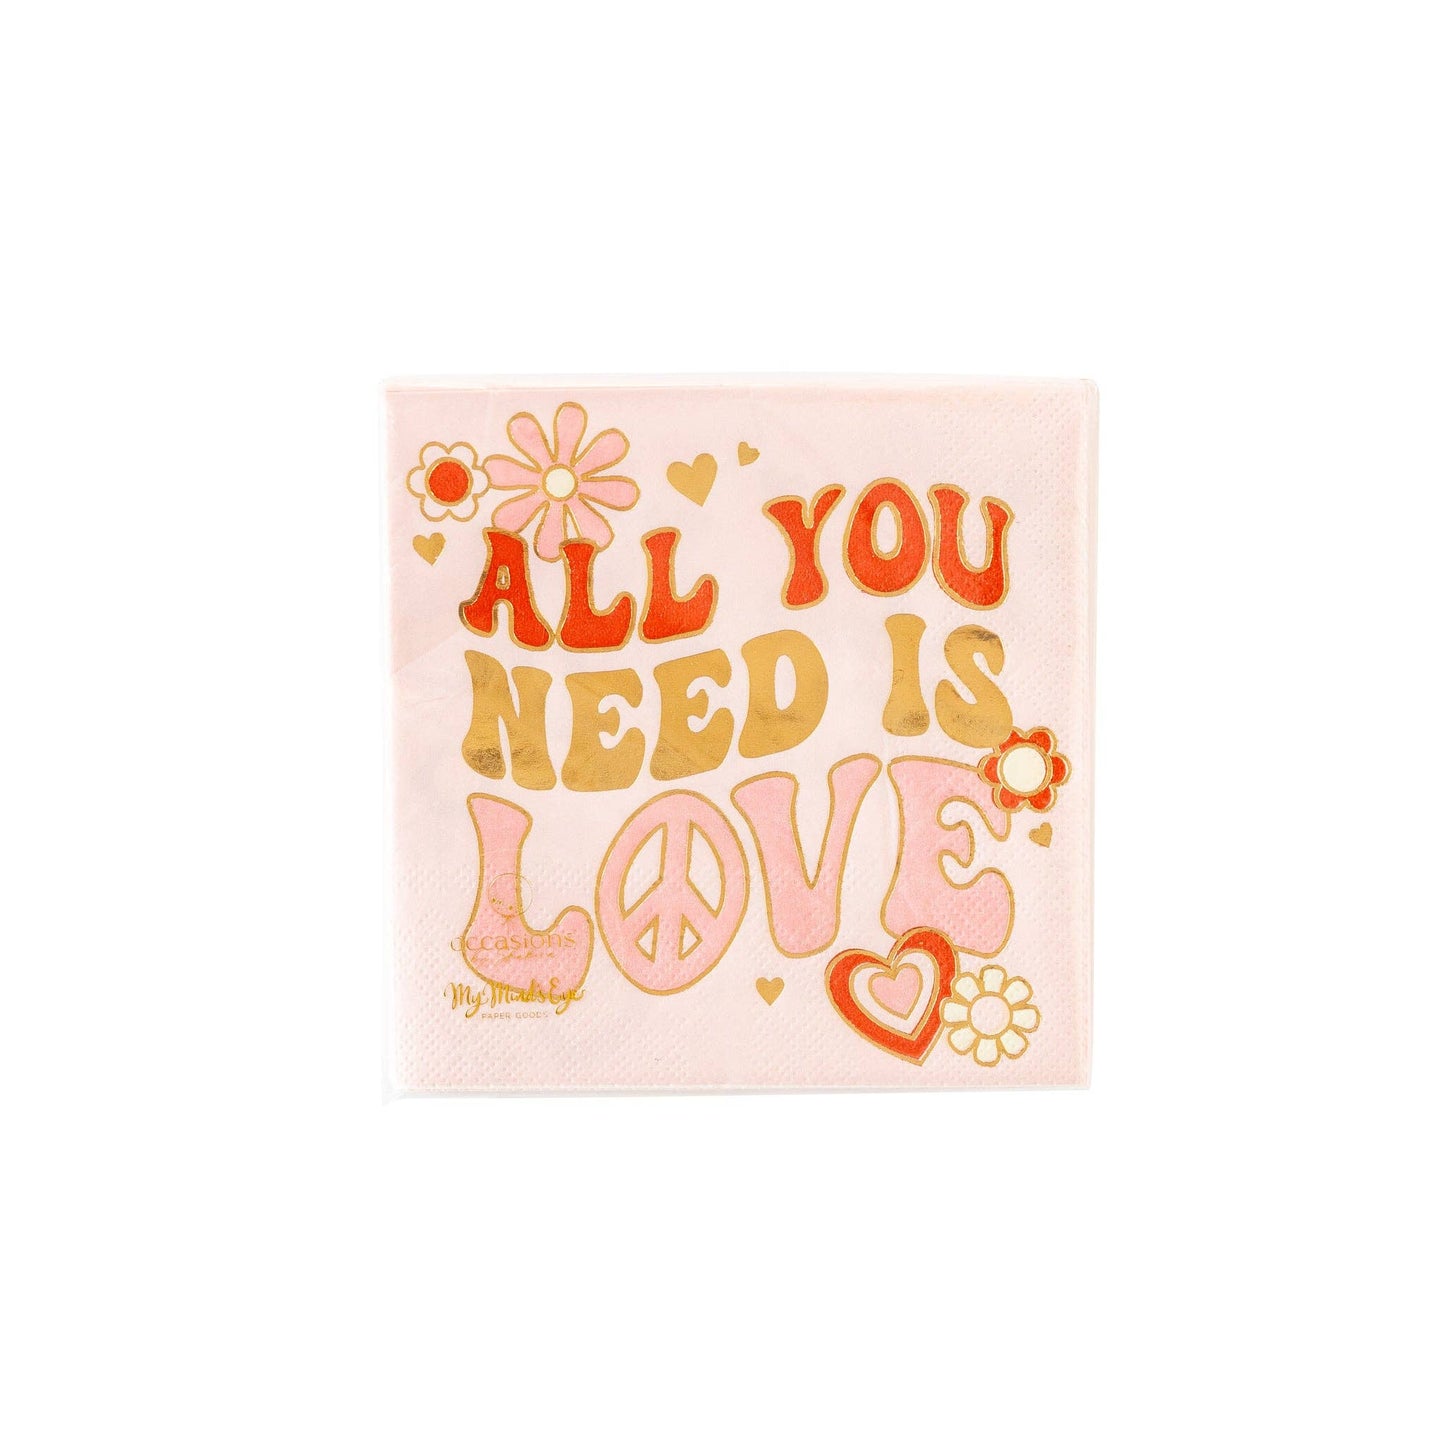 Occasions by Shakira - All you Need is Love Napkin